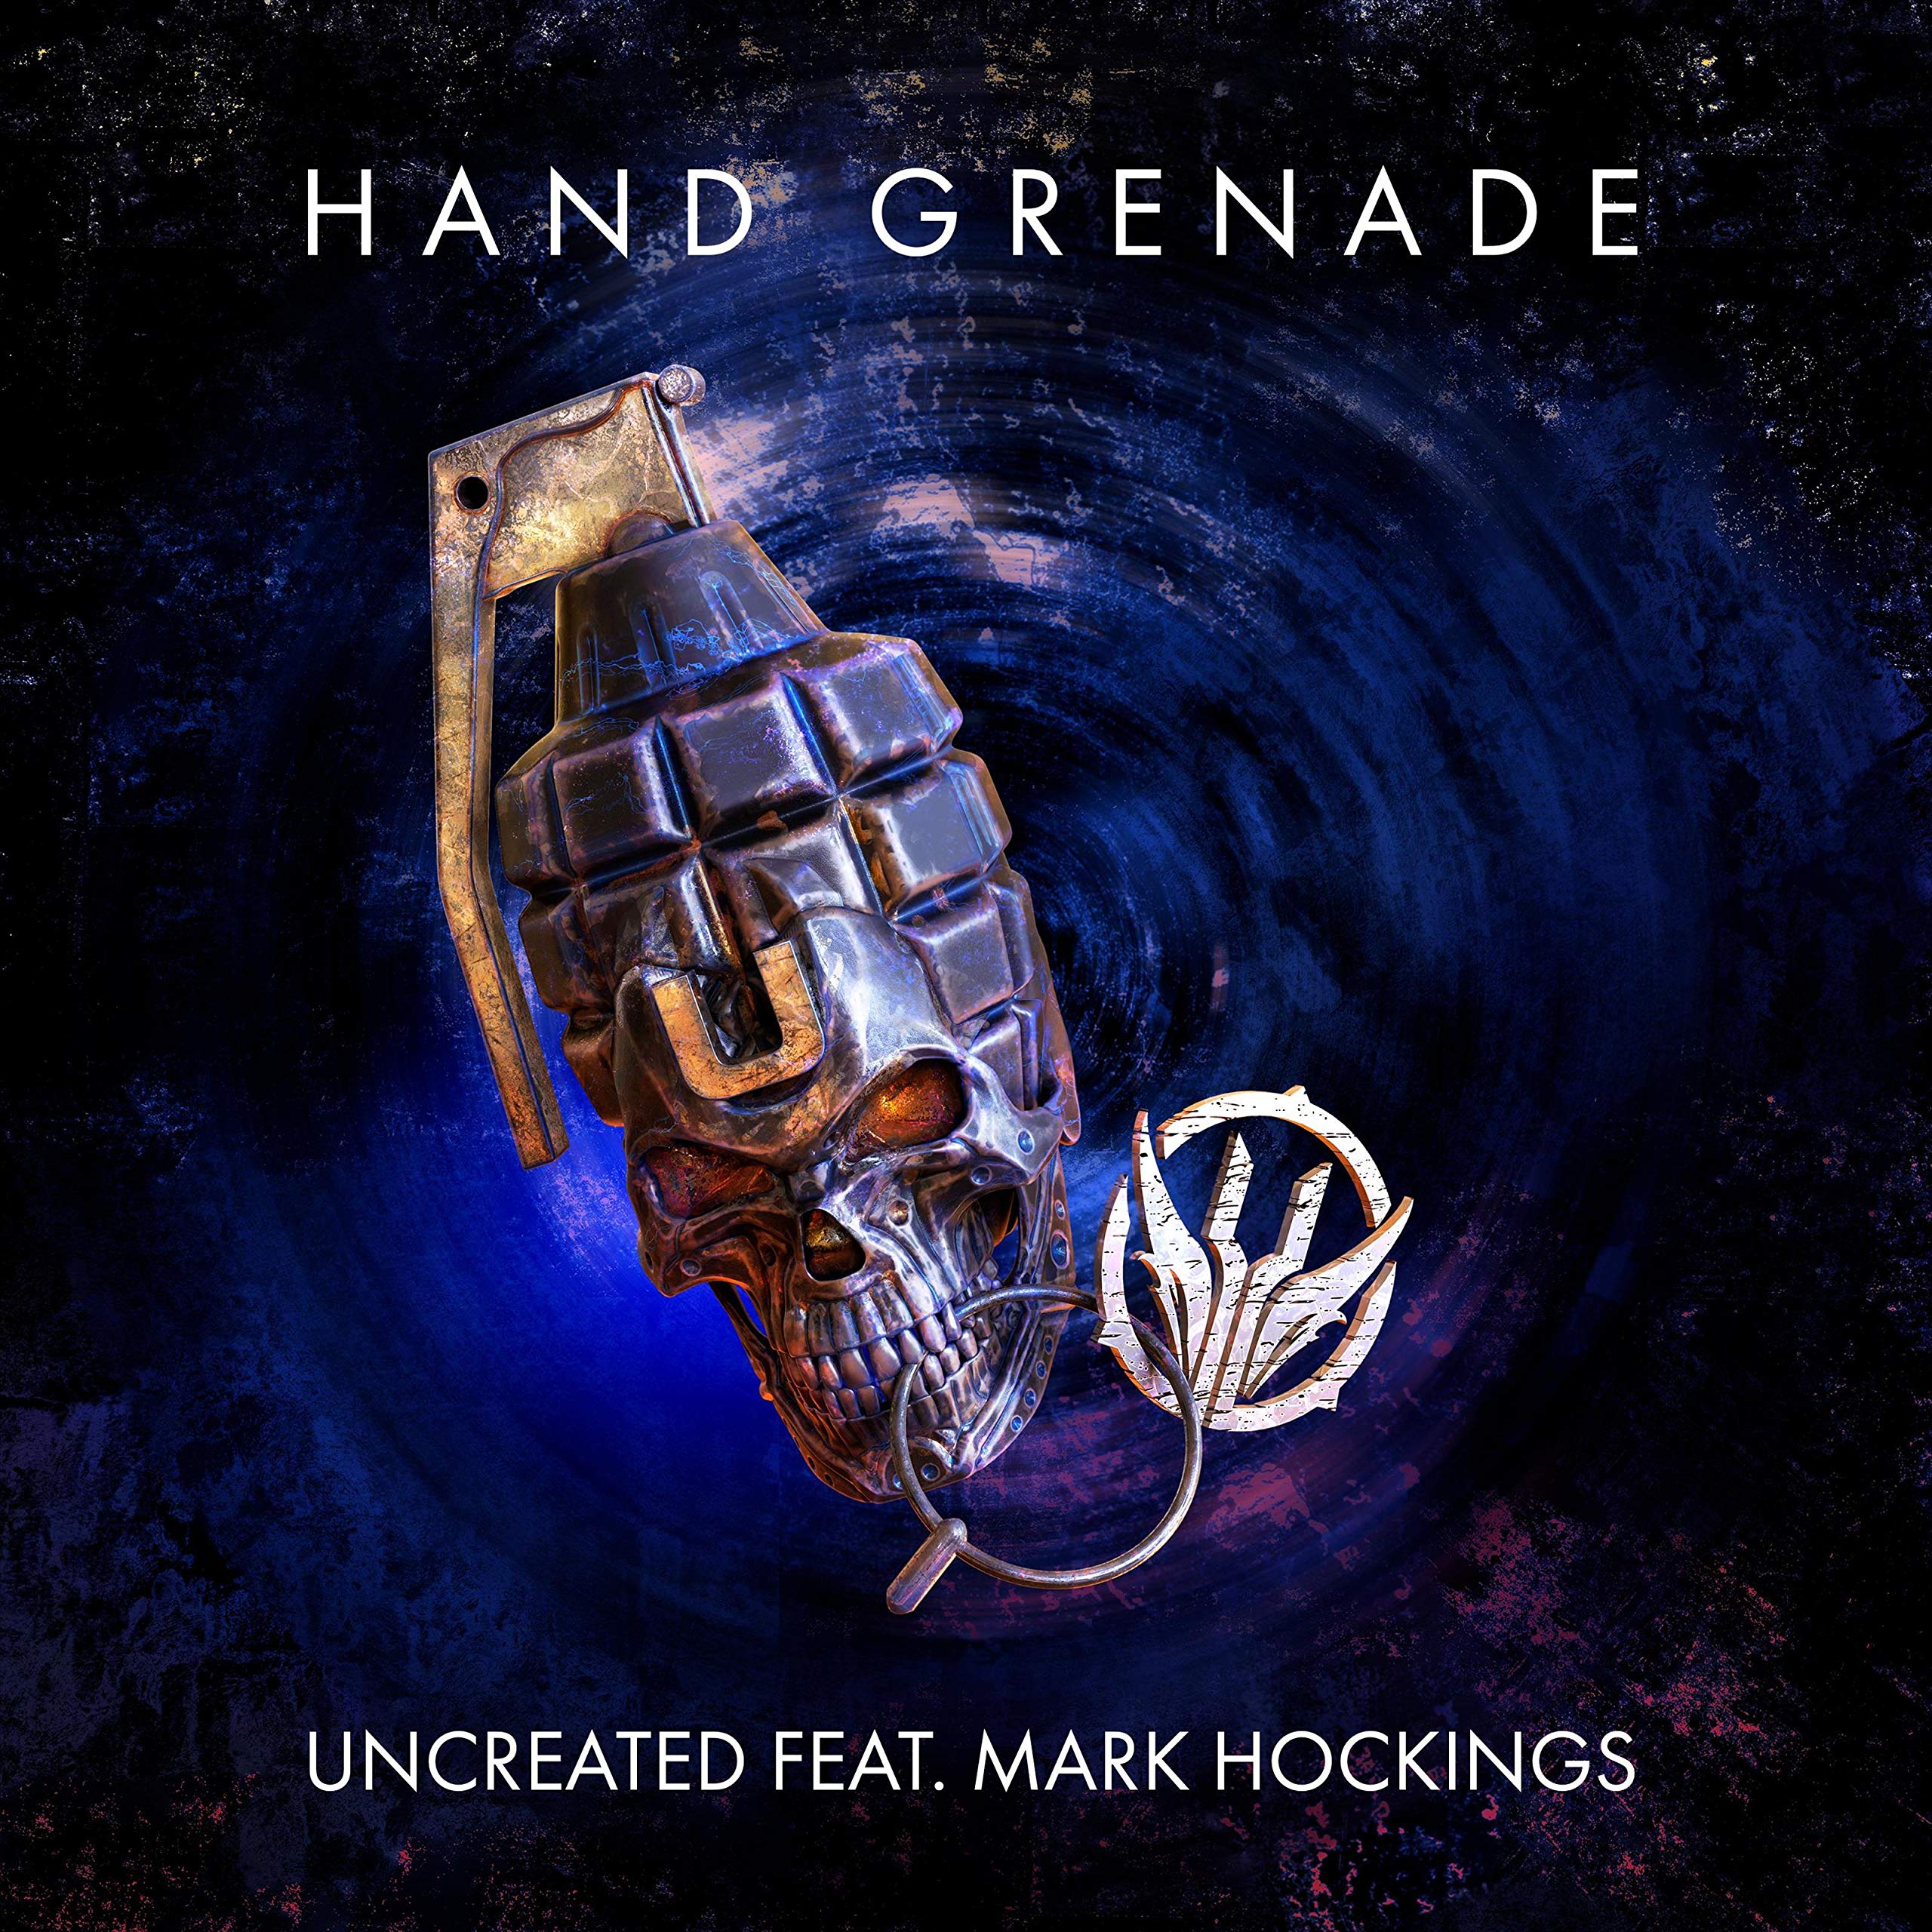 Uncreated-Hand Grenade-Limited Edition-CDEP-FLAC-2021-FWYH